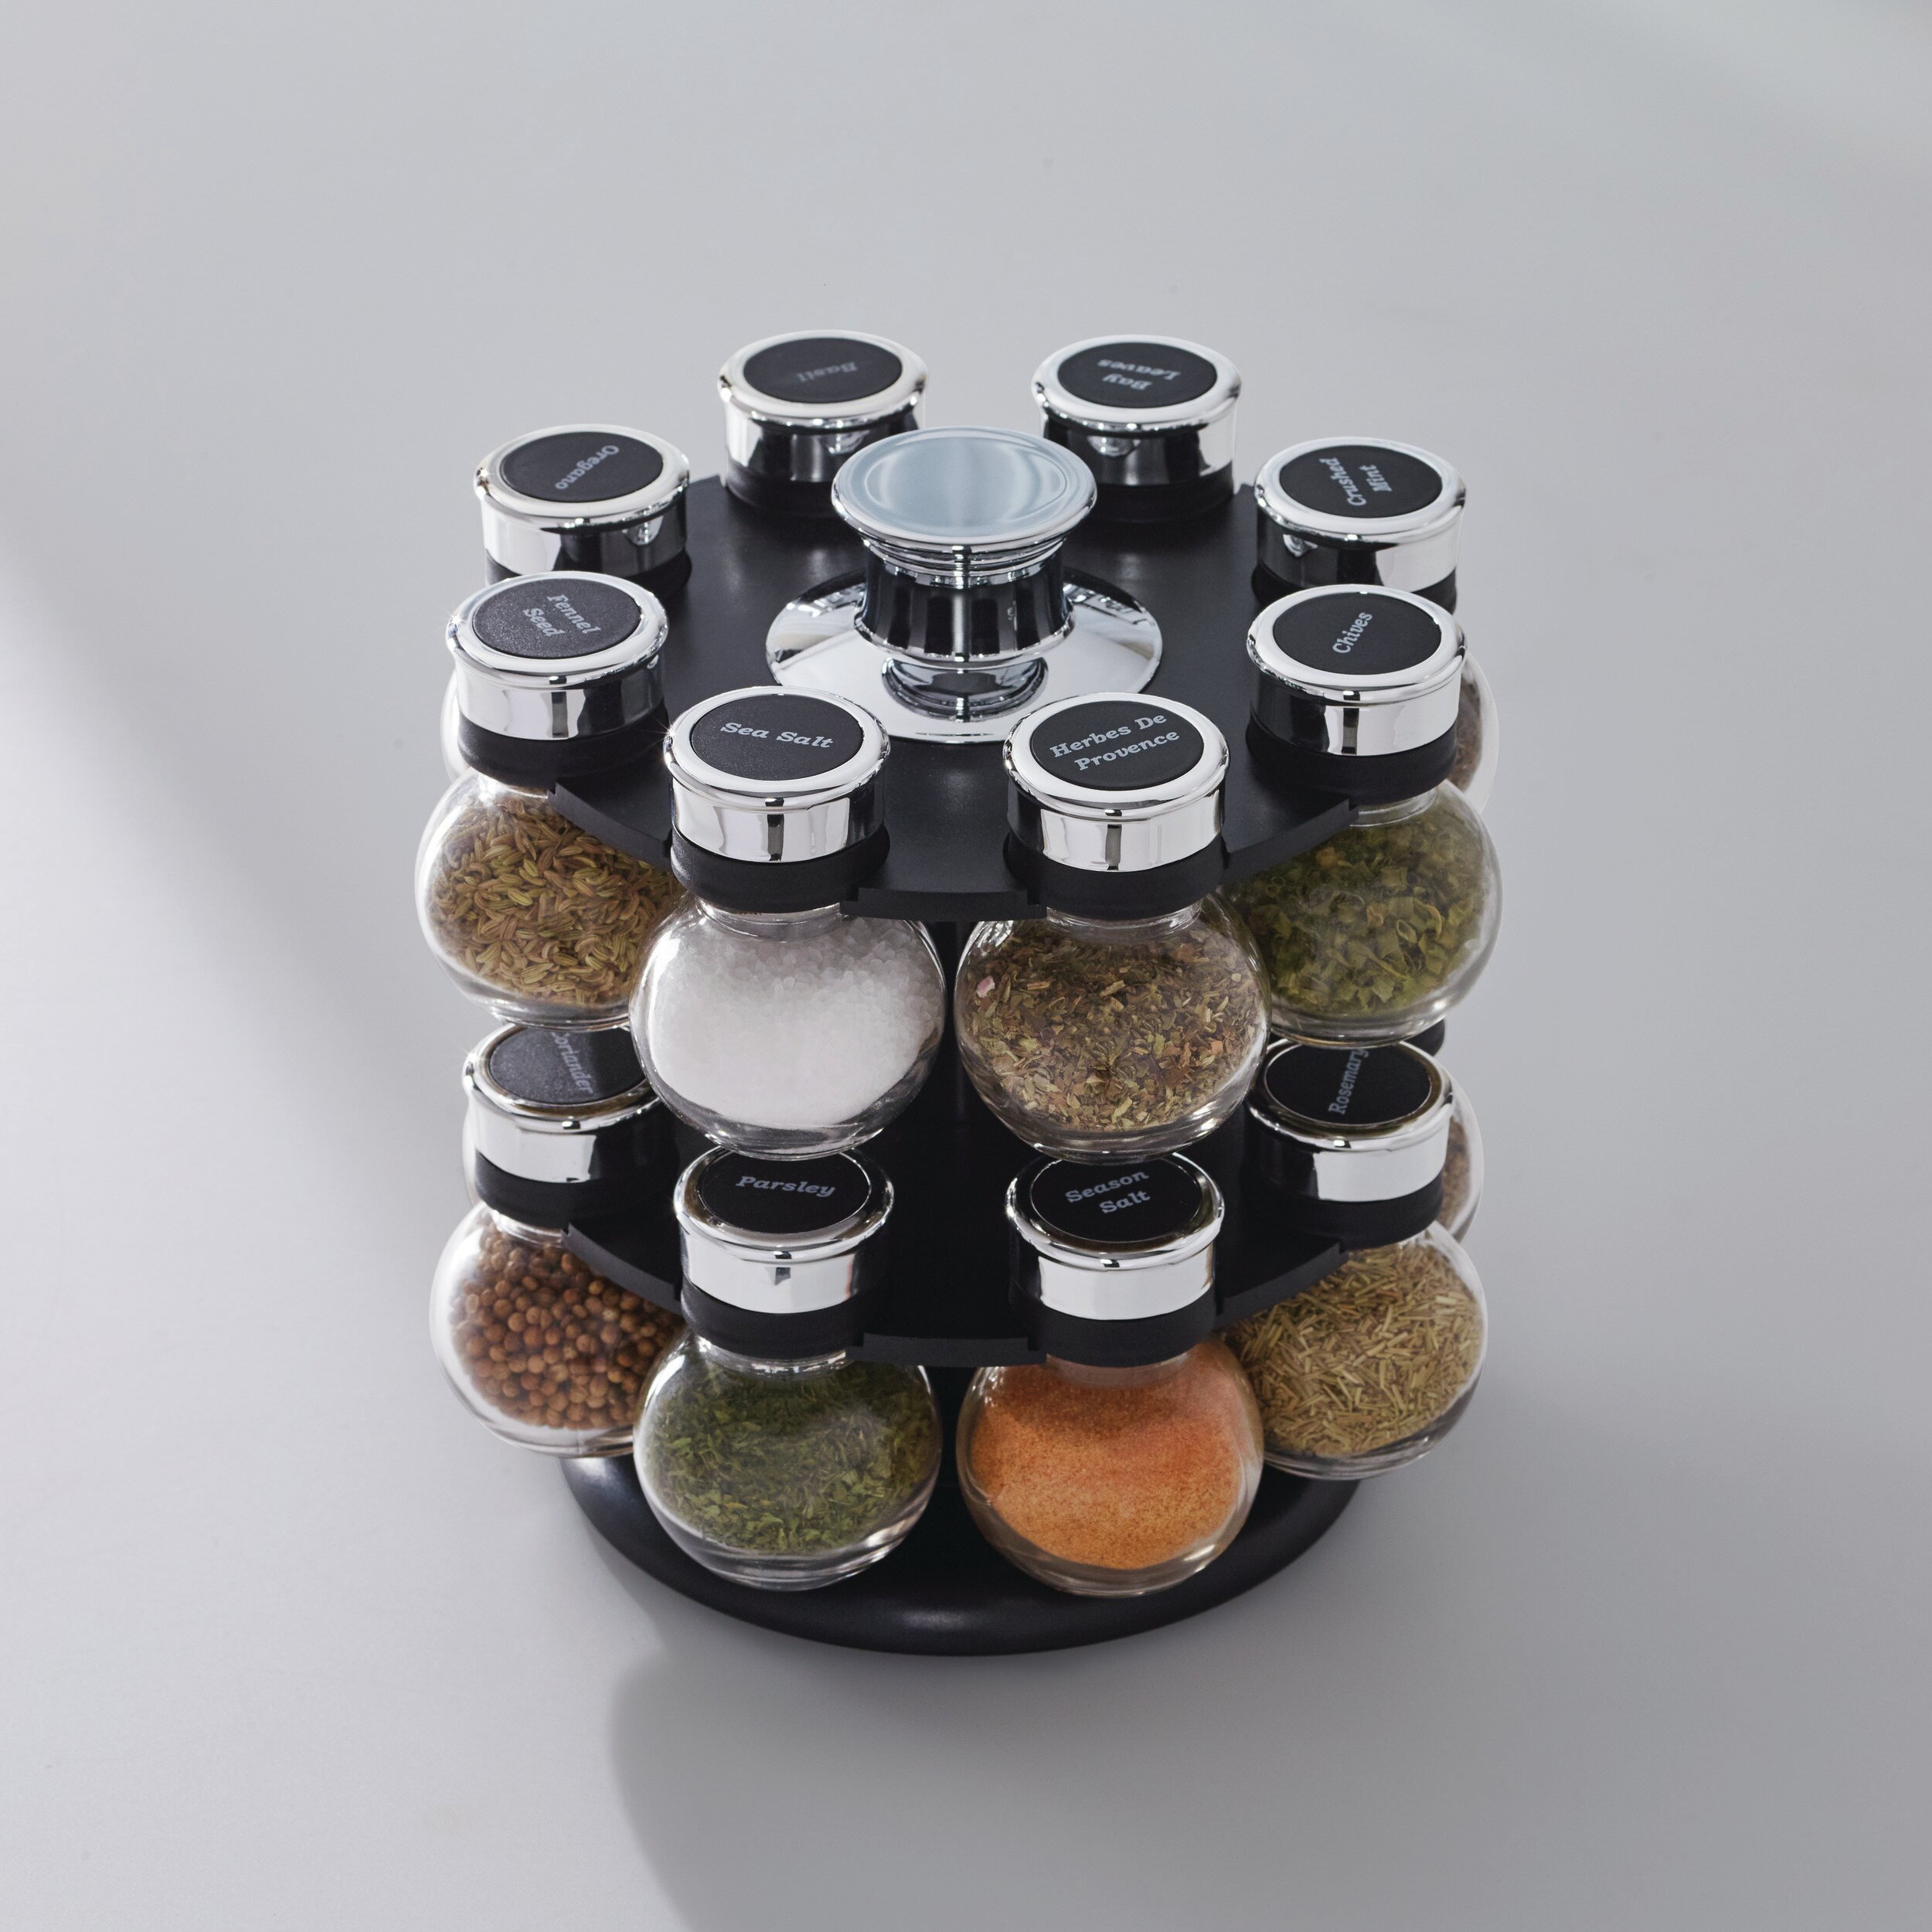 Kamenstein Heritage 20-Jar Revolving Pre-Filled Countertop Spice Rack  Organizer Stainless Steel with Free Spice Refills for 5 Years 